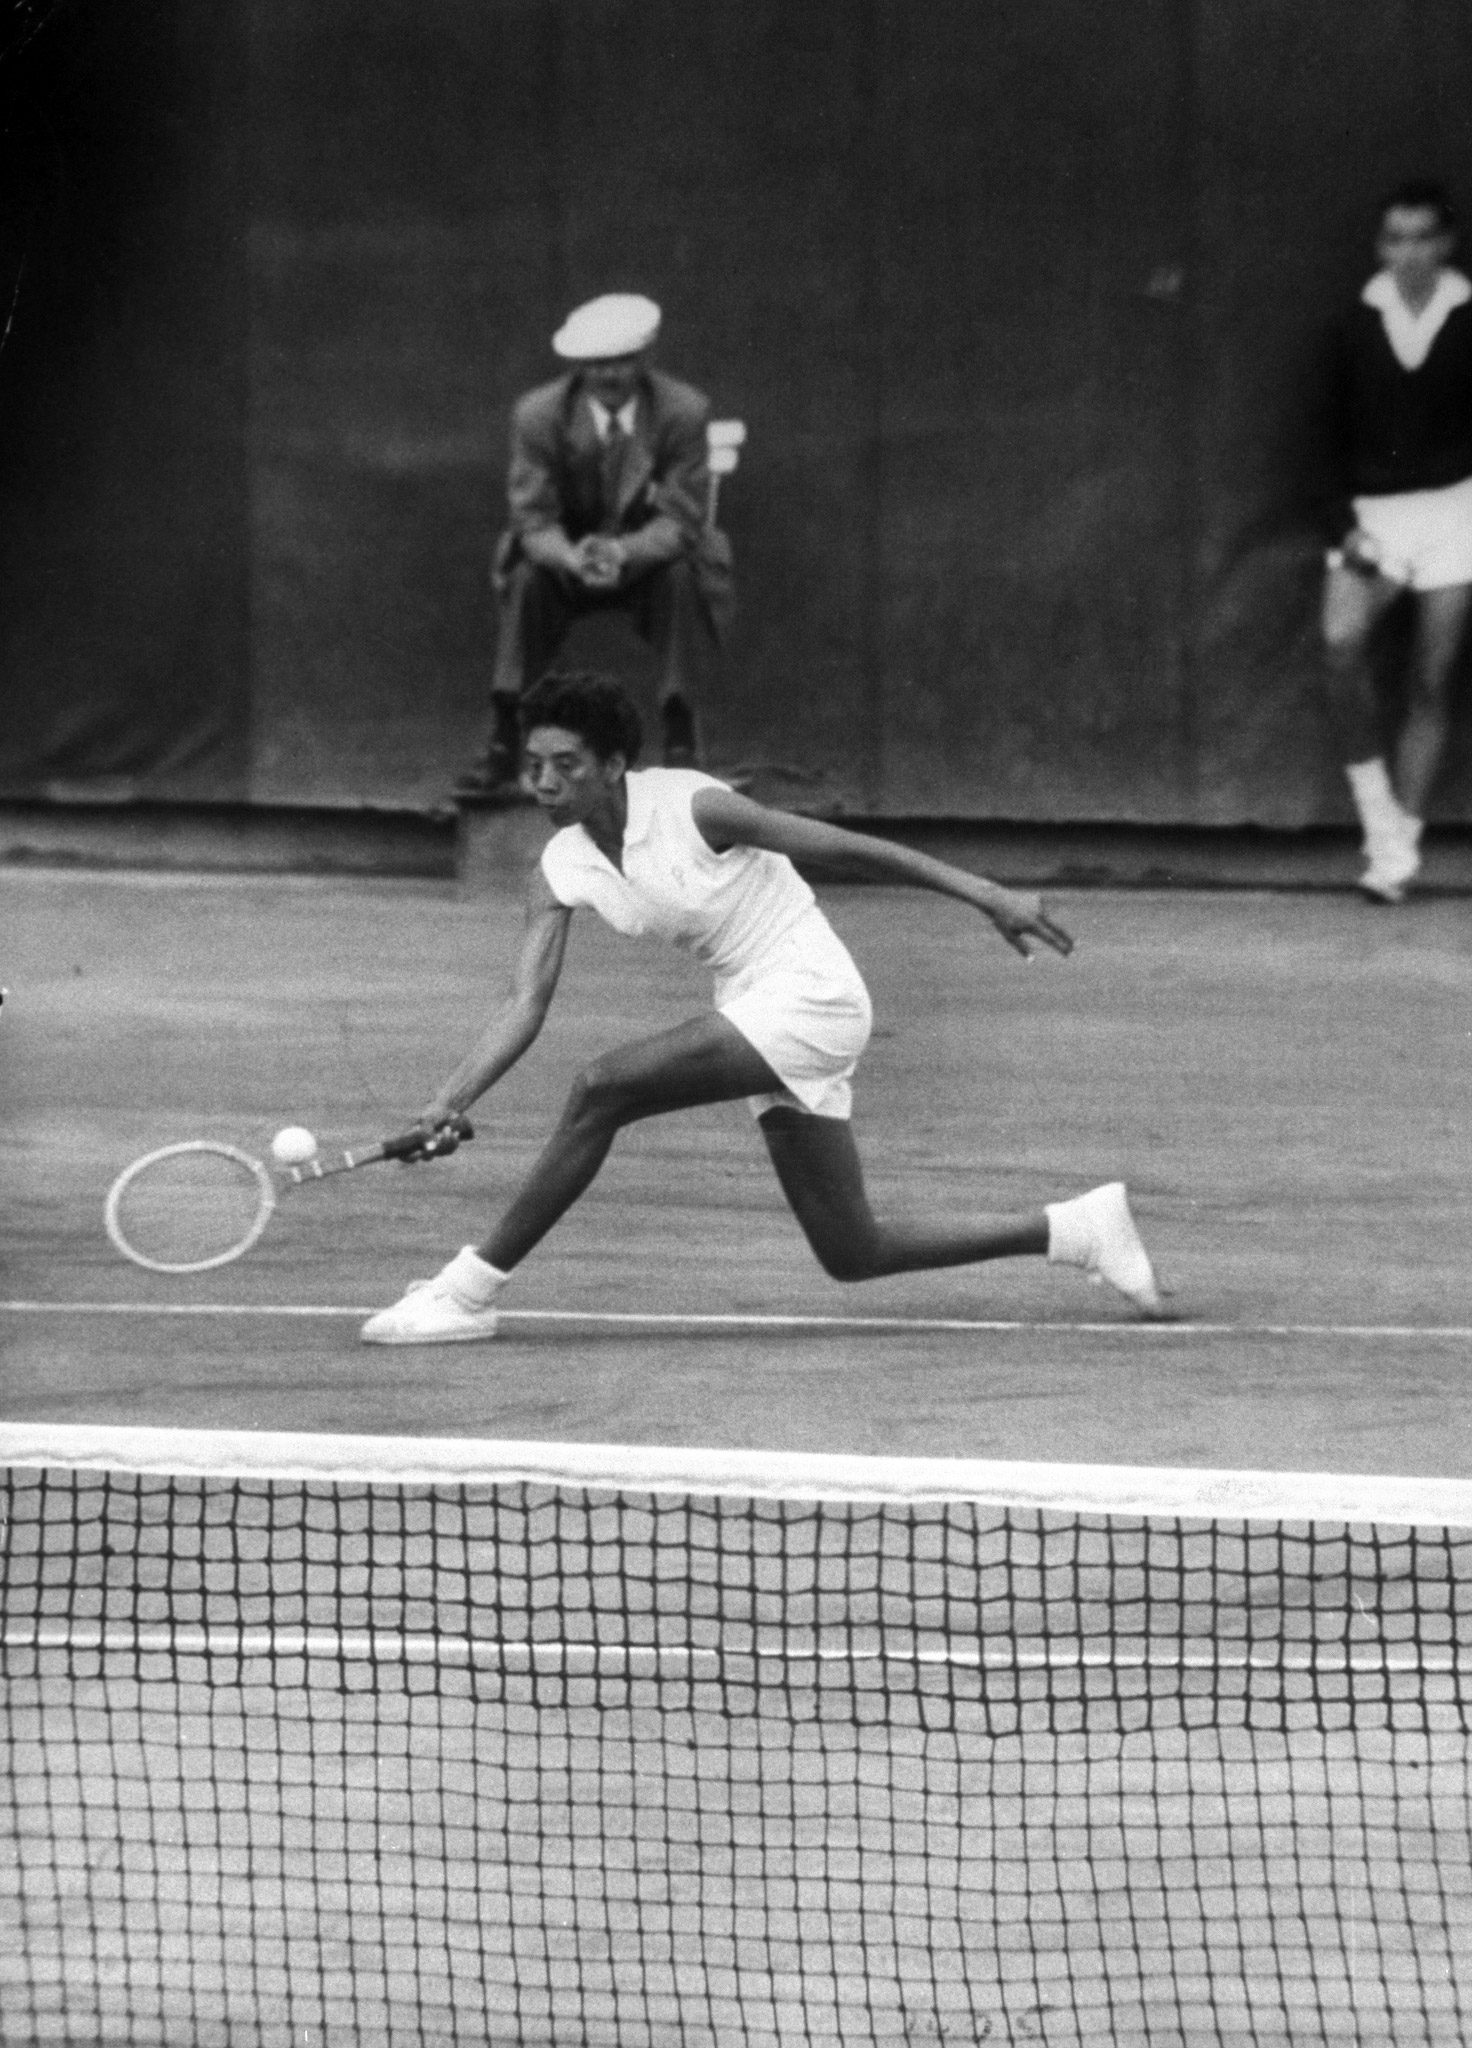 Althea Gibson in France, 1956